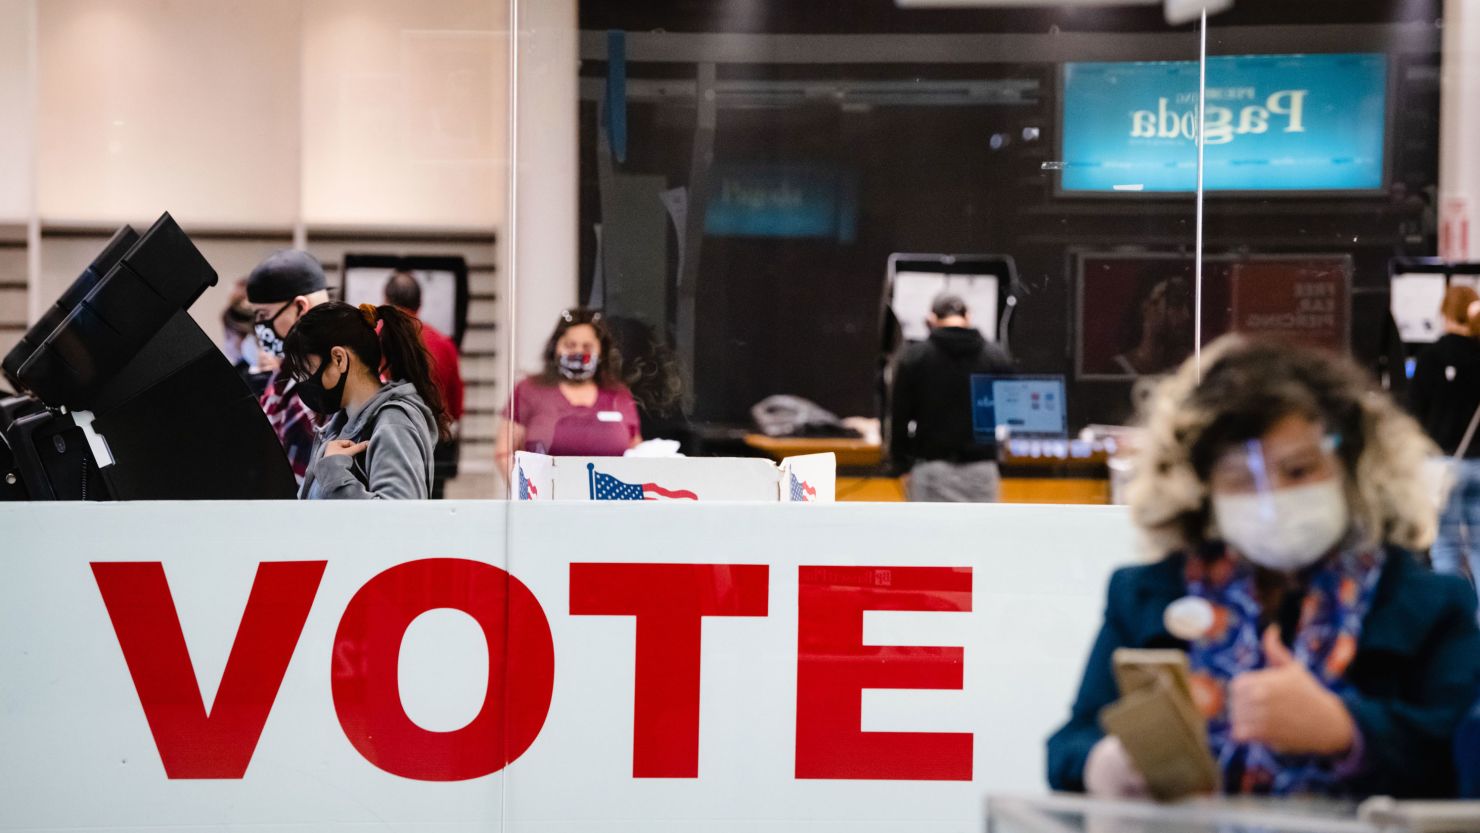 Voters arrived to cast their ballots Tuesday at Basset Place Mall in El Paso, Texas, as the city faces a coronavirus outbreak.